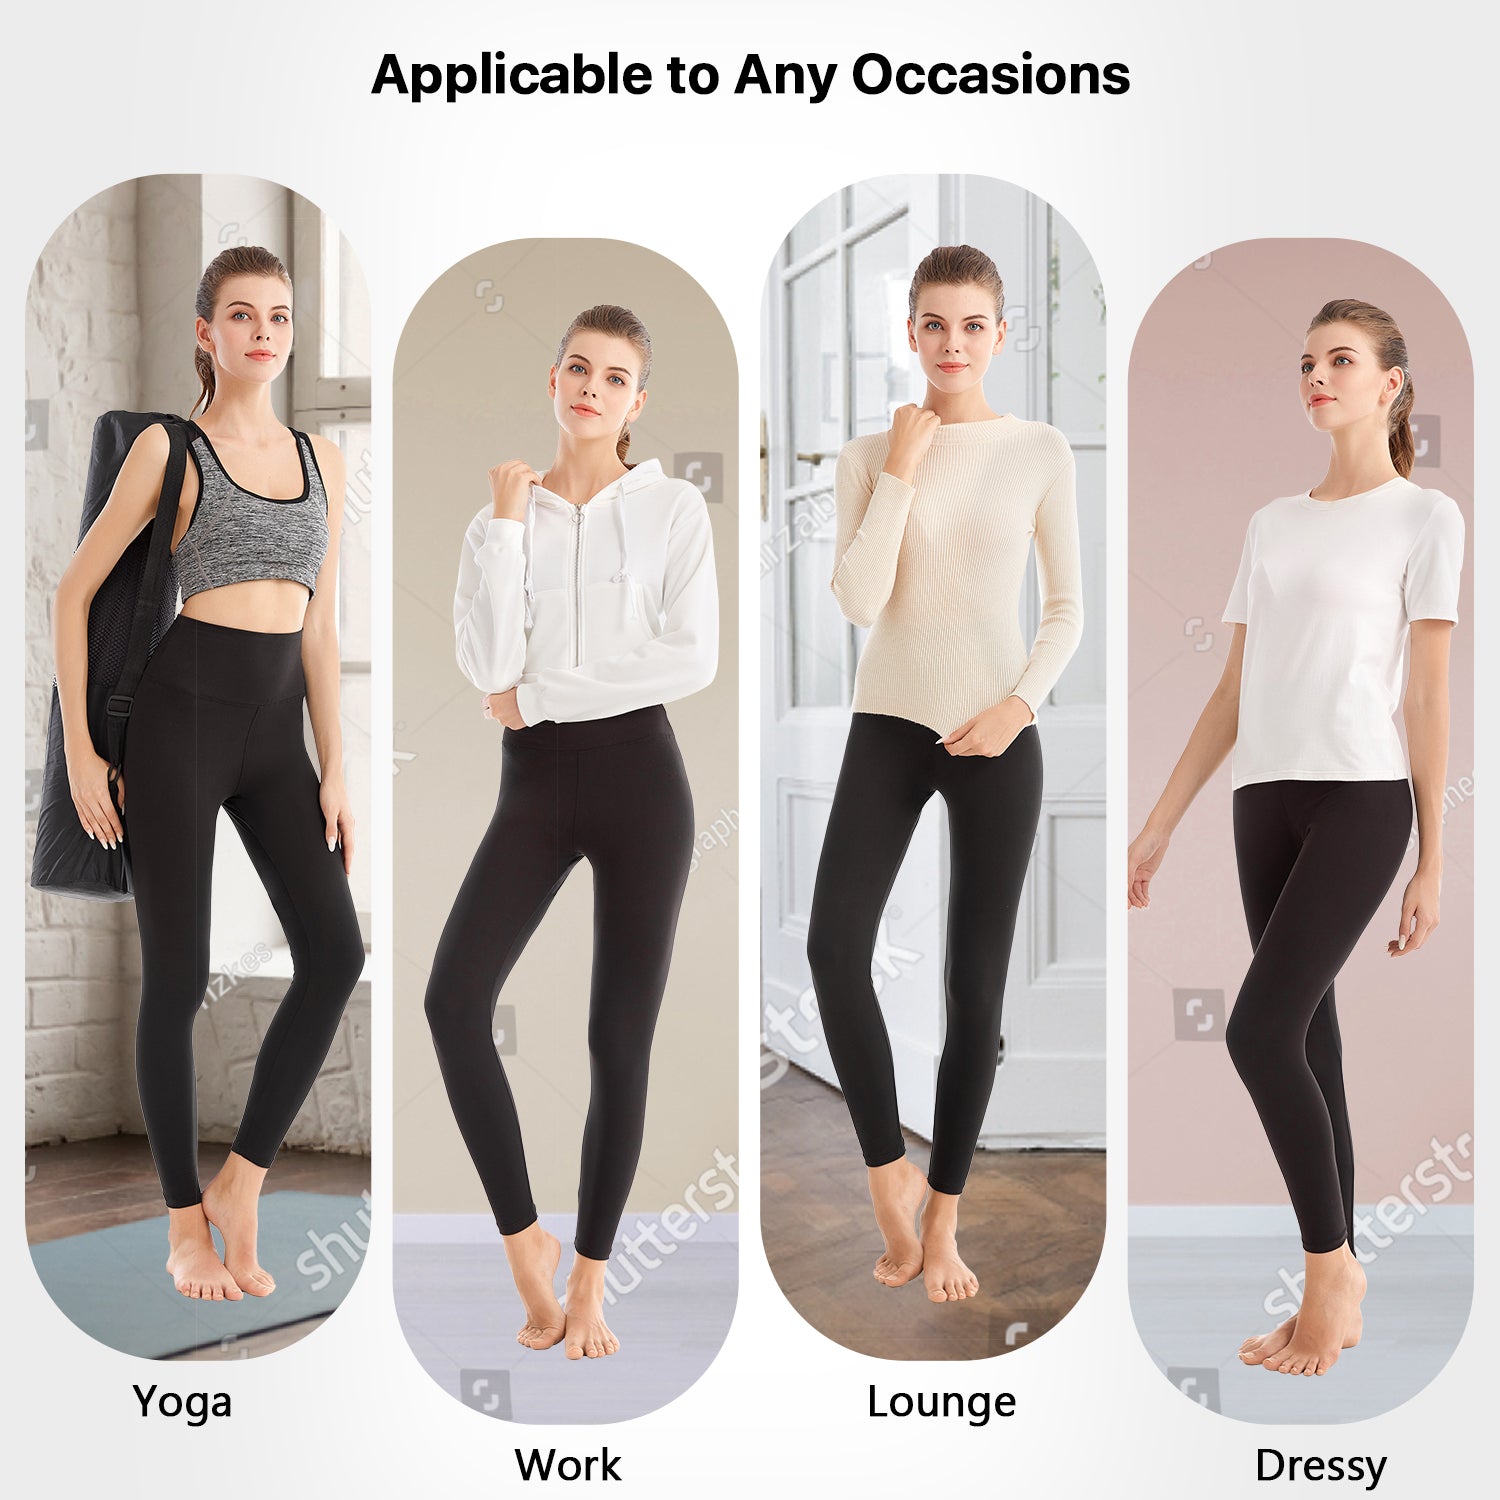 SINOPHANT High Waisted Leggings for Women, Buttery Soft Elastic Opaque  Tummy Control Leggings,Plus Size Workout Gym Yoga Stretchy Pants, #1 Pack,  Grey, S-M price in UAE,  UAE